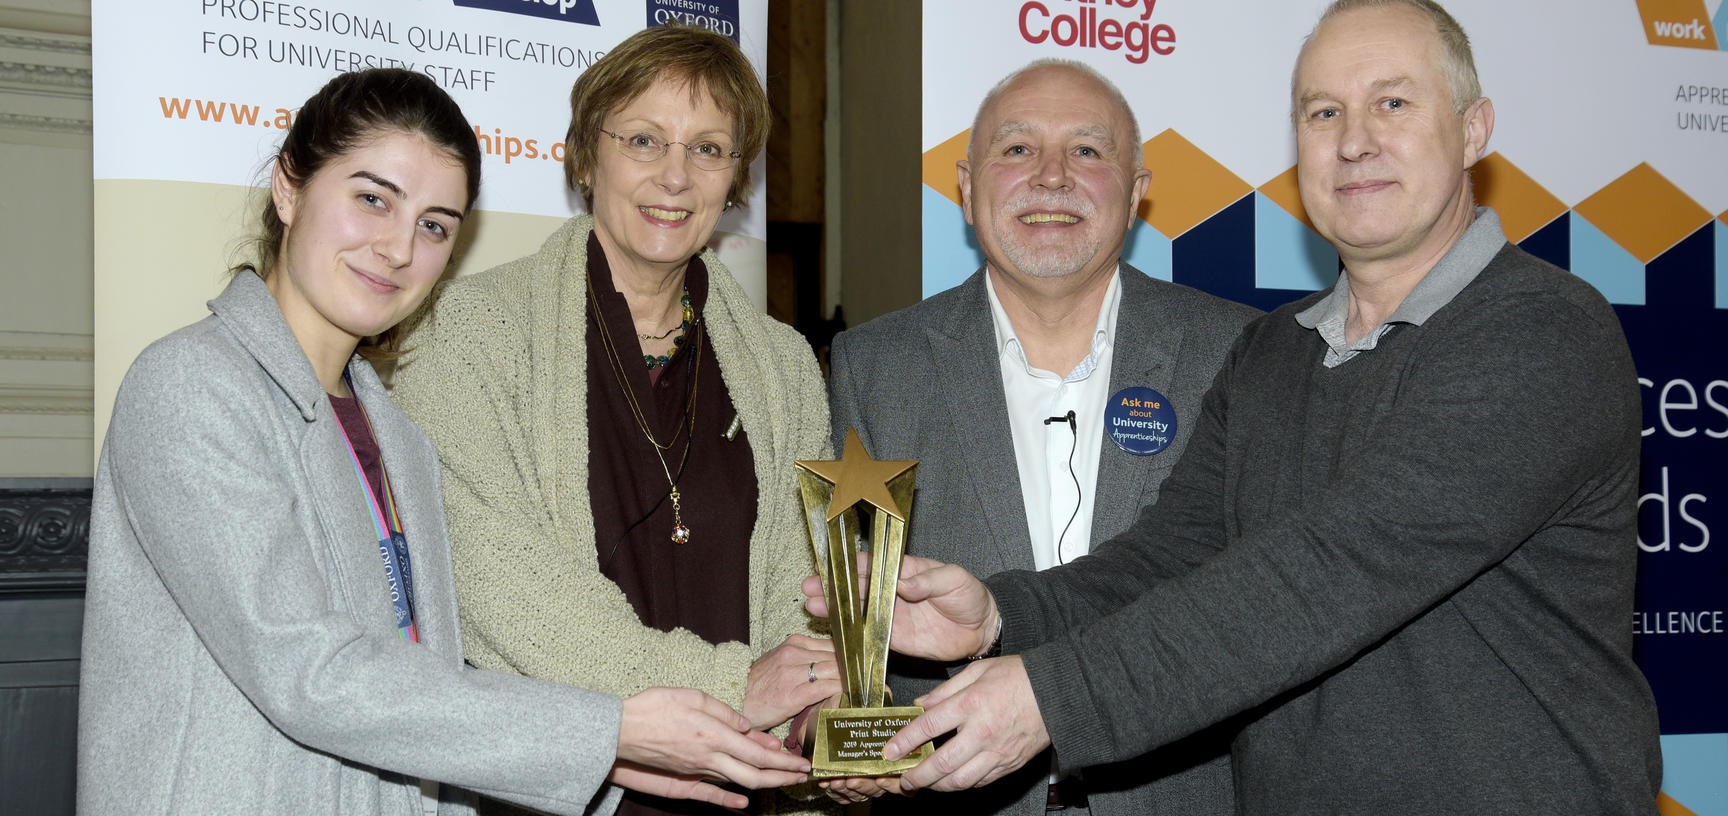 Manager Bob Malloy, and apprentice Jordan Morris from the print studio accepting their award from Clive Shepherd and the registrar Gill Aitken at the 2019 University Apprenticeship awards